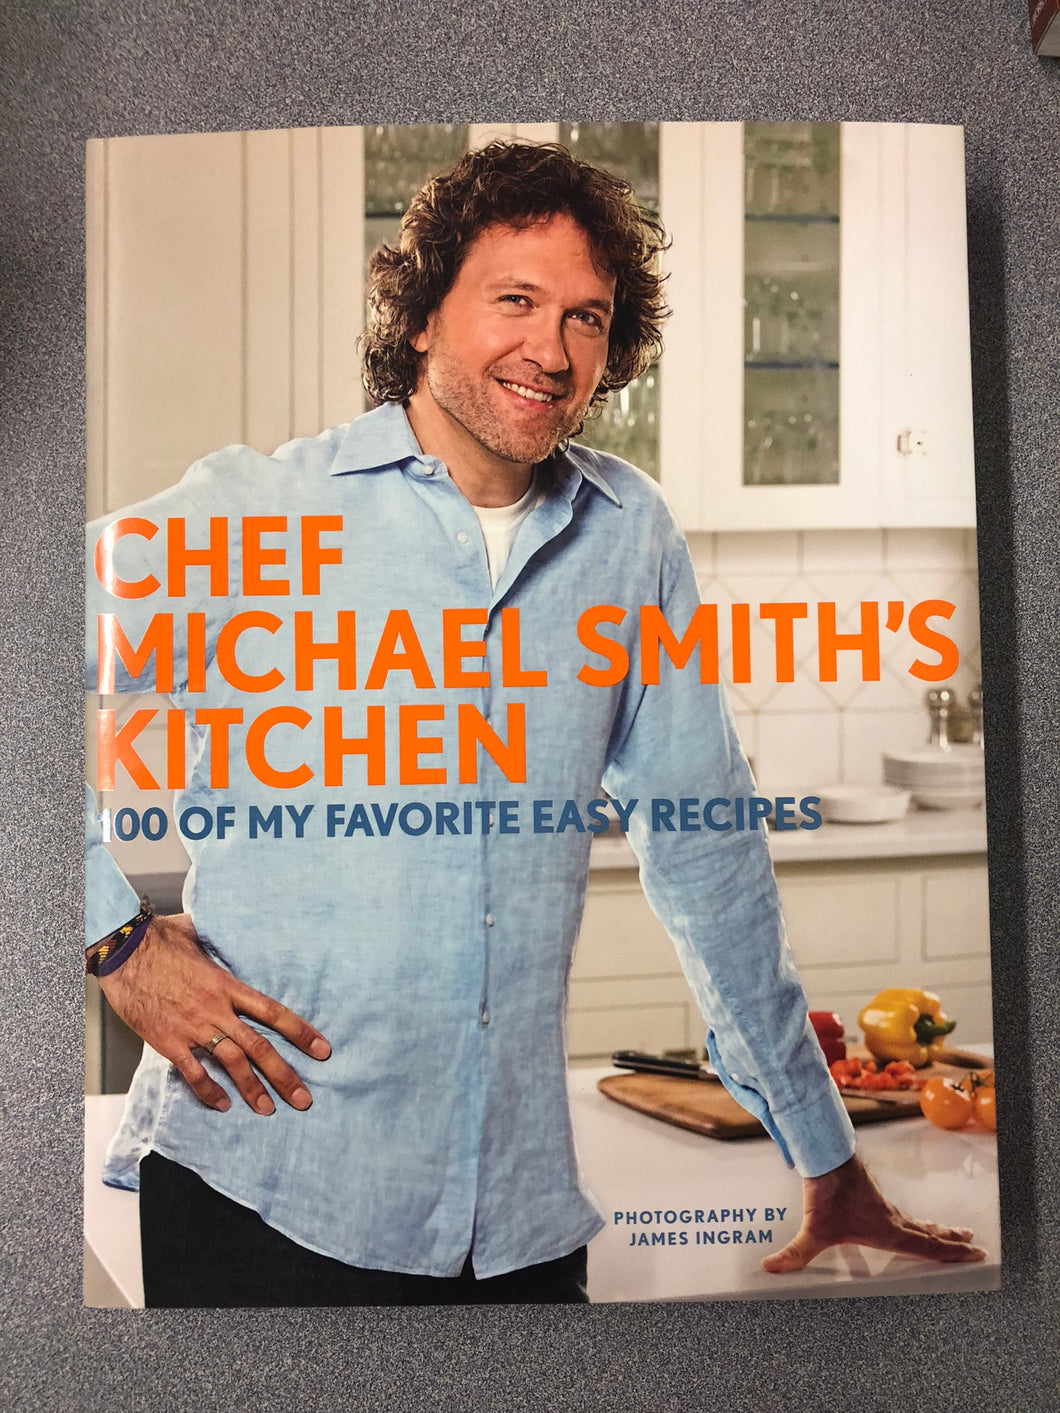 Chef Michael Smith's Kitchen: 100 of My Favorite Easy Recipes, Smith, Michael [2012] CO 7/22